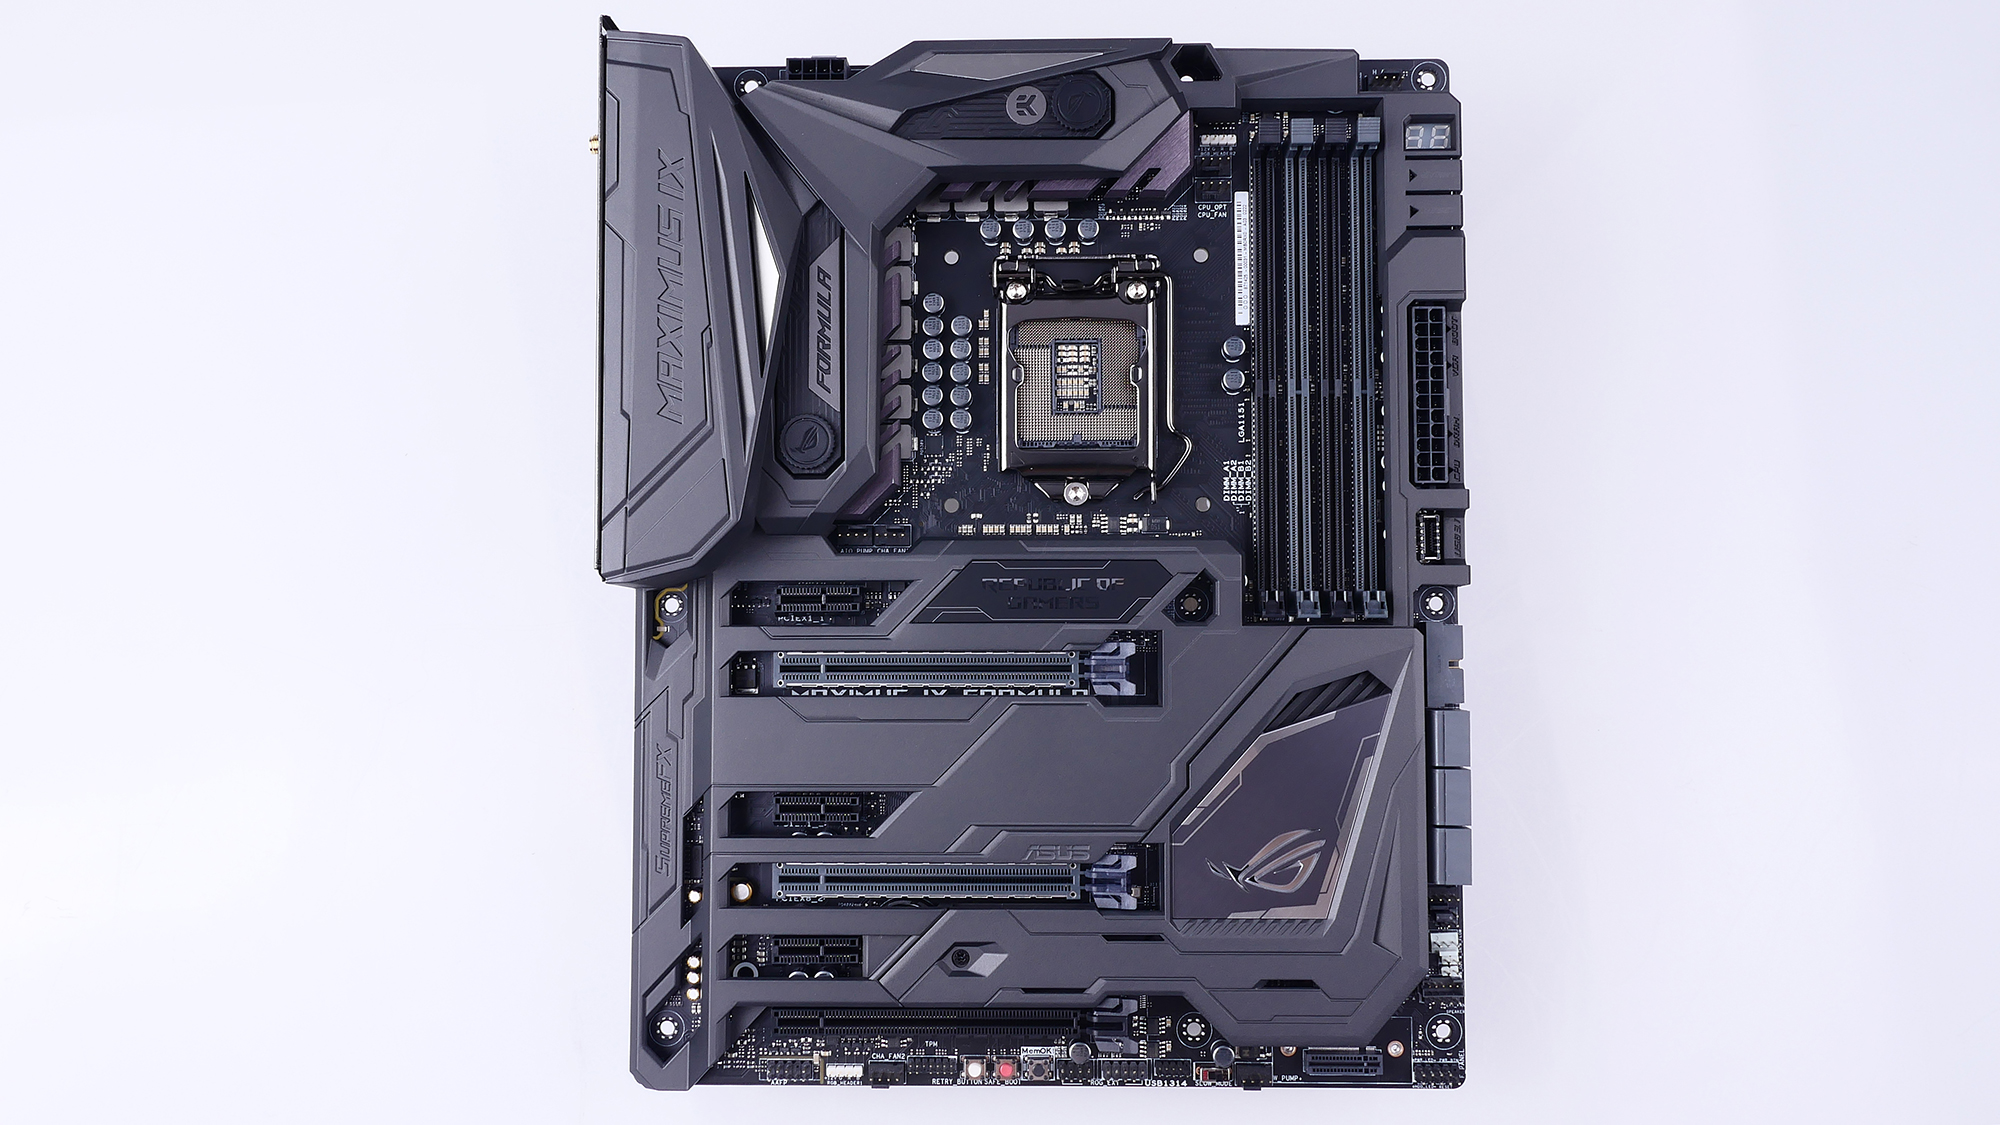 Which Z270 Motherboard is best for you - The Maximus IX Formula or 